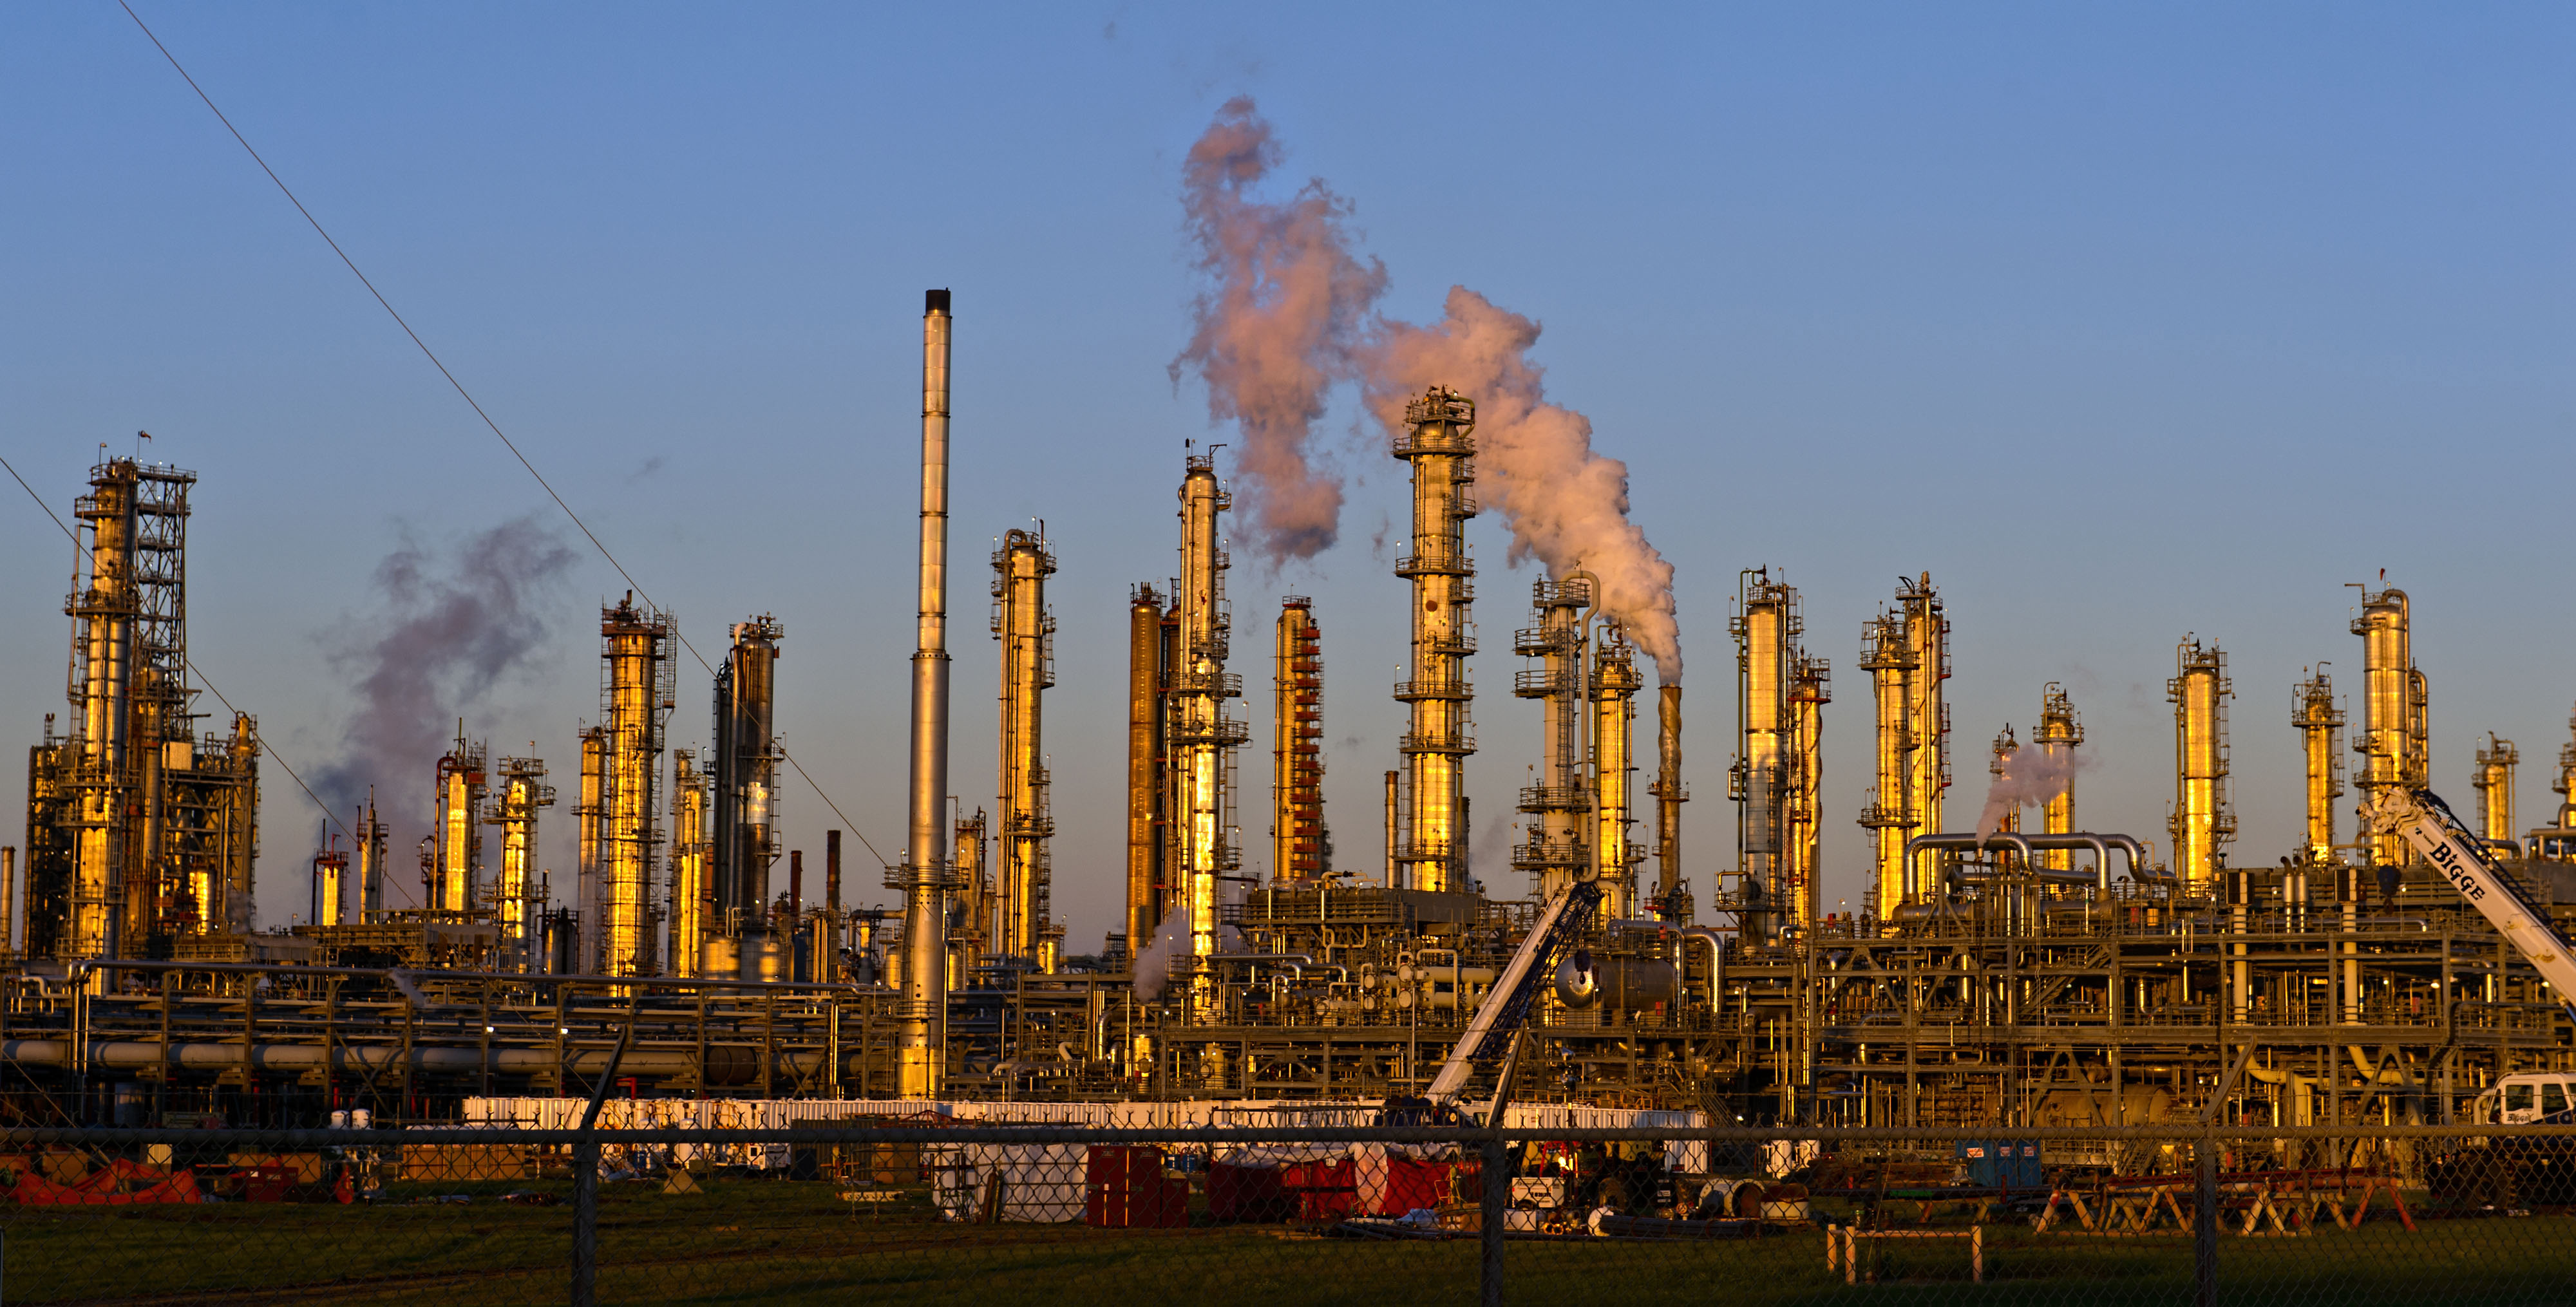 A Flint Hills Resources oil refinery stands in Corpus Christi, Texas, U.S., on Thursday, Jan. 7, 2016. Crude oil slid Thursday to the lowest level since December 2003 as turbulence in China, the worlds biggest energy consumer, prompted concerns about the strength of demand. Photographer: Eddie Seal/Bloomberg